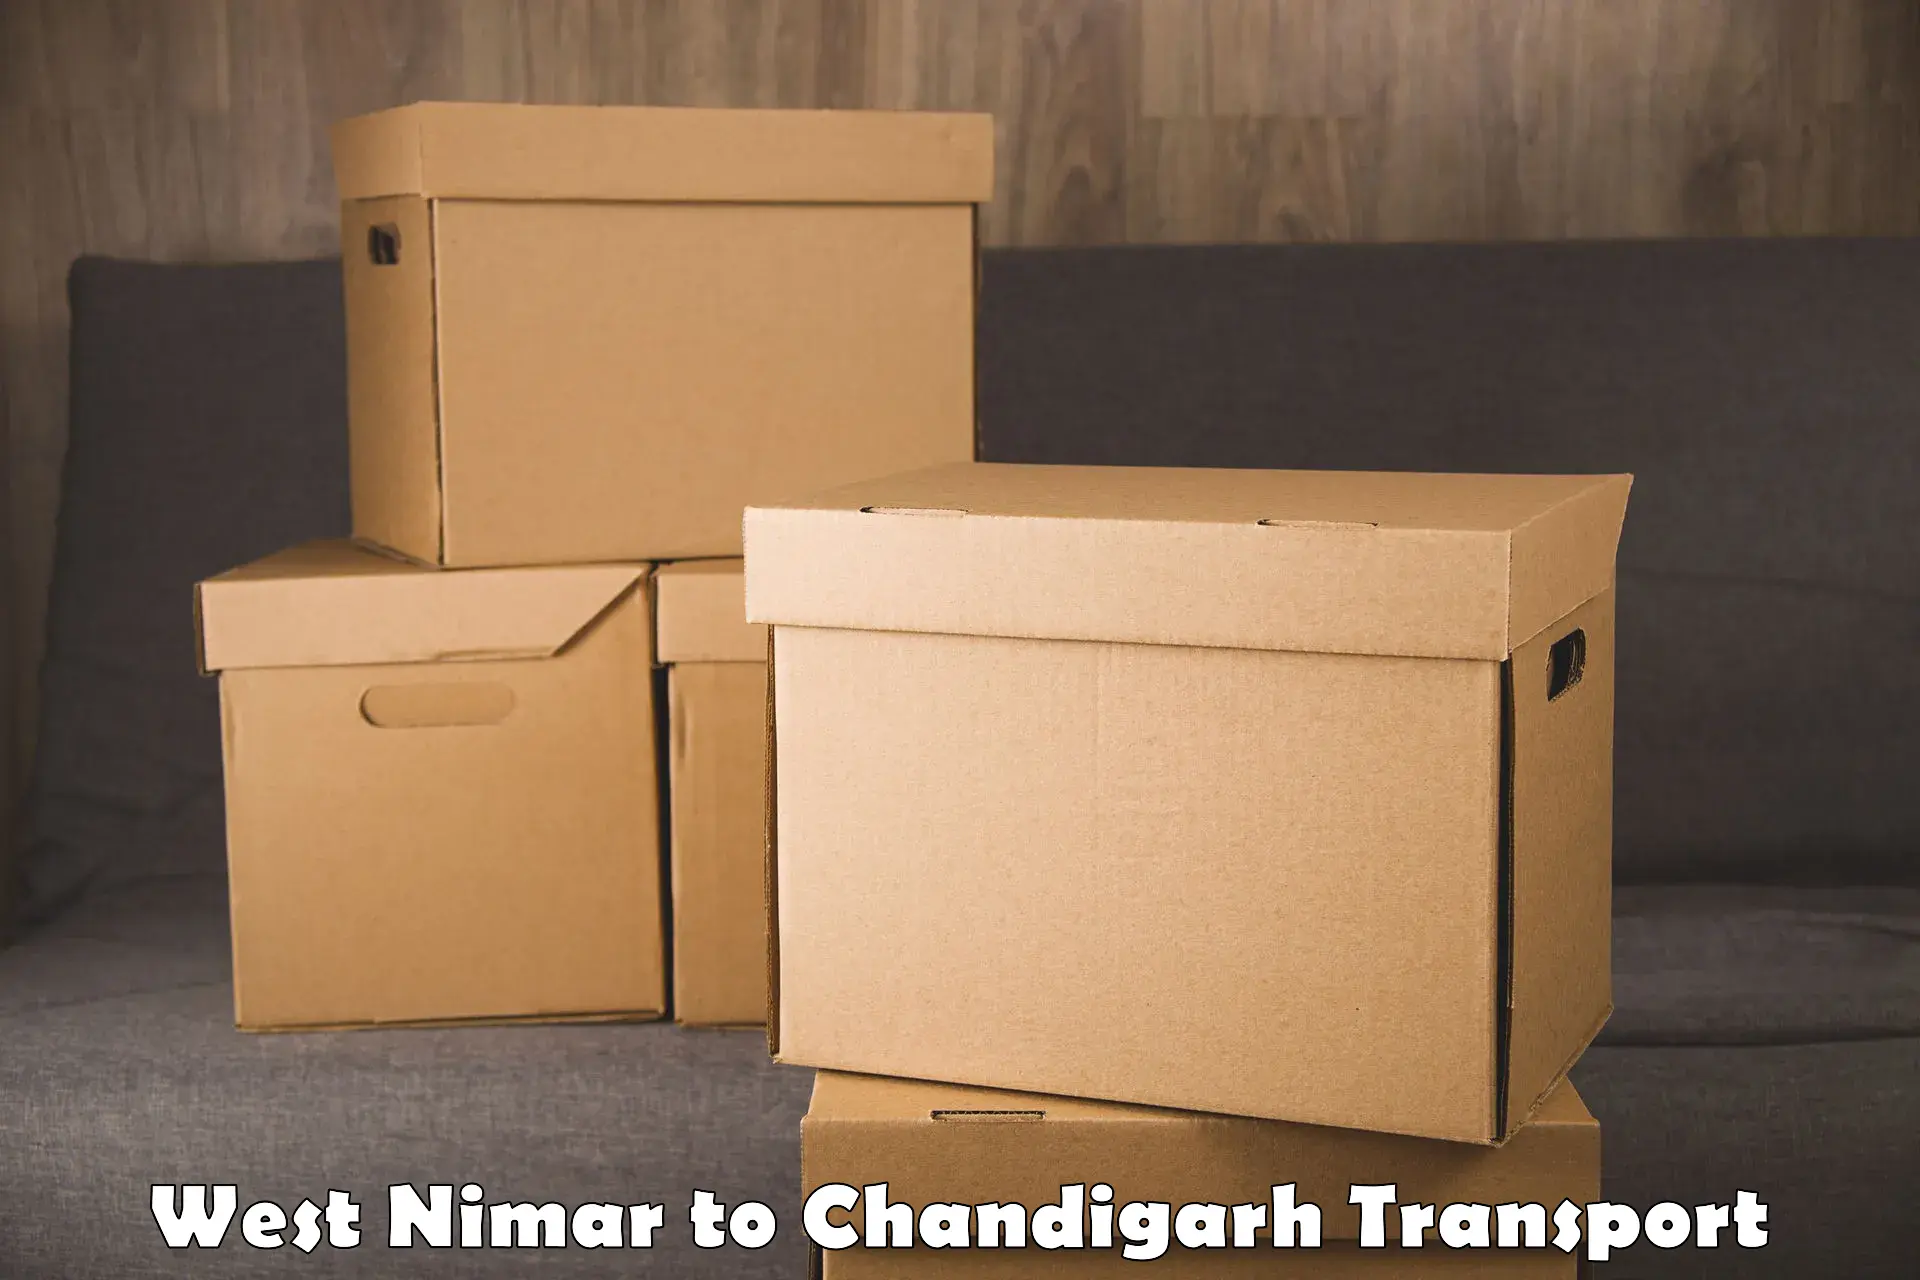 Daily transport service West Nimar to Chandigarh